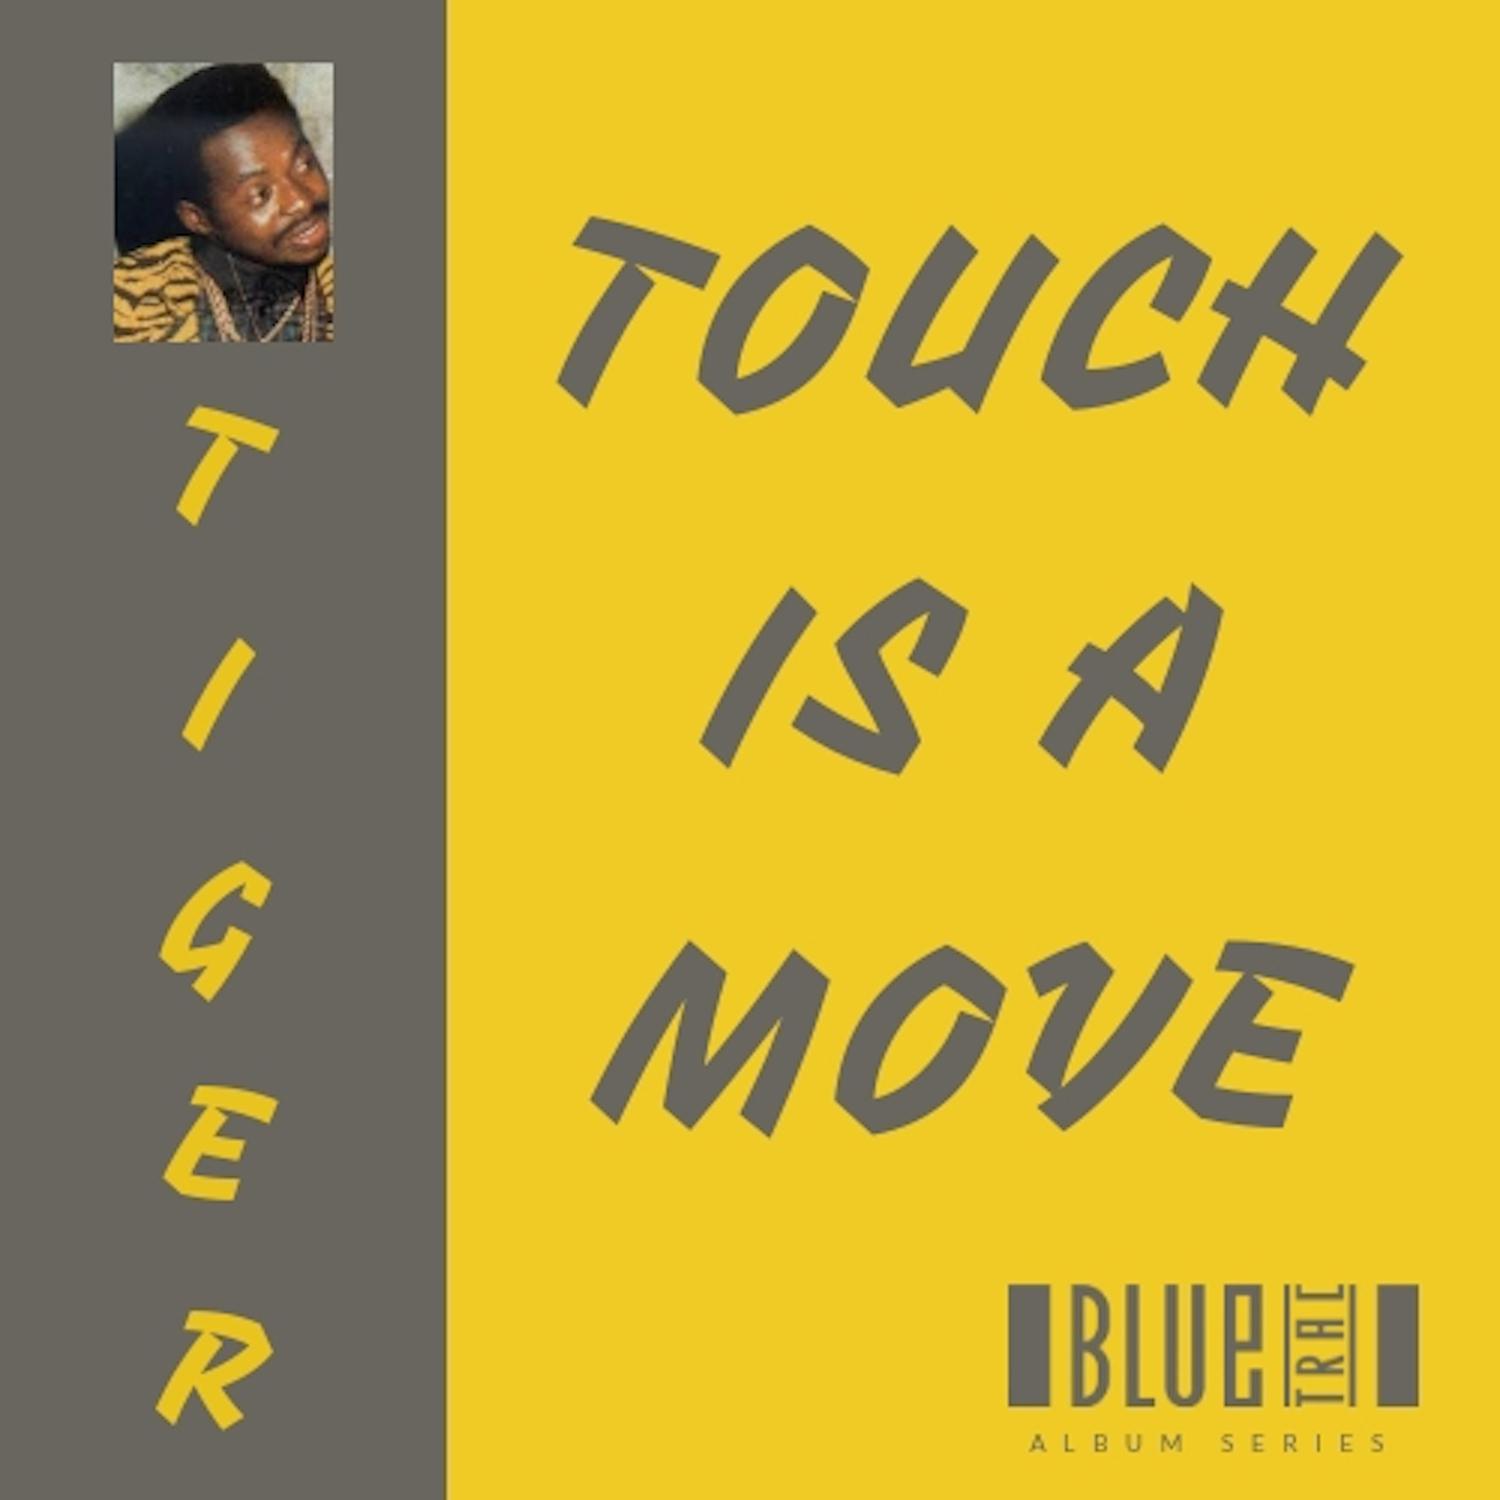 Tiger - Touch is a Move